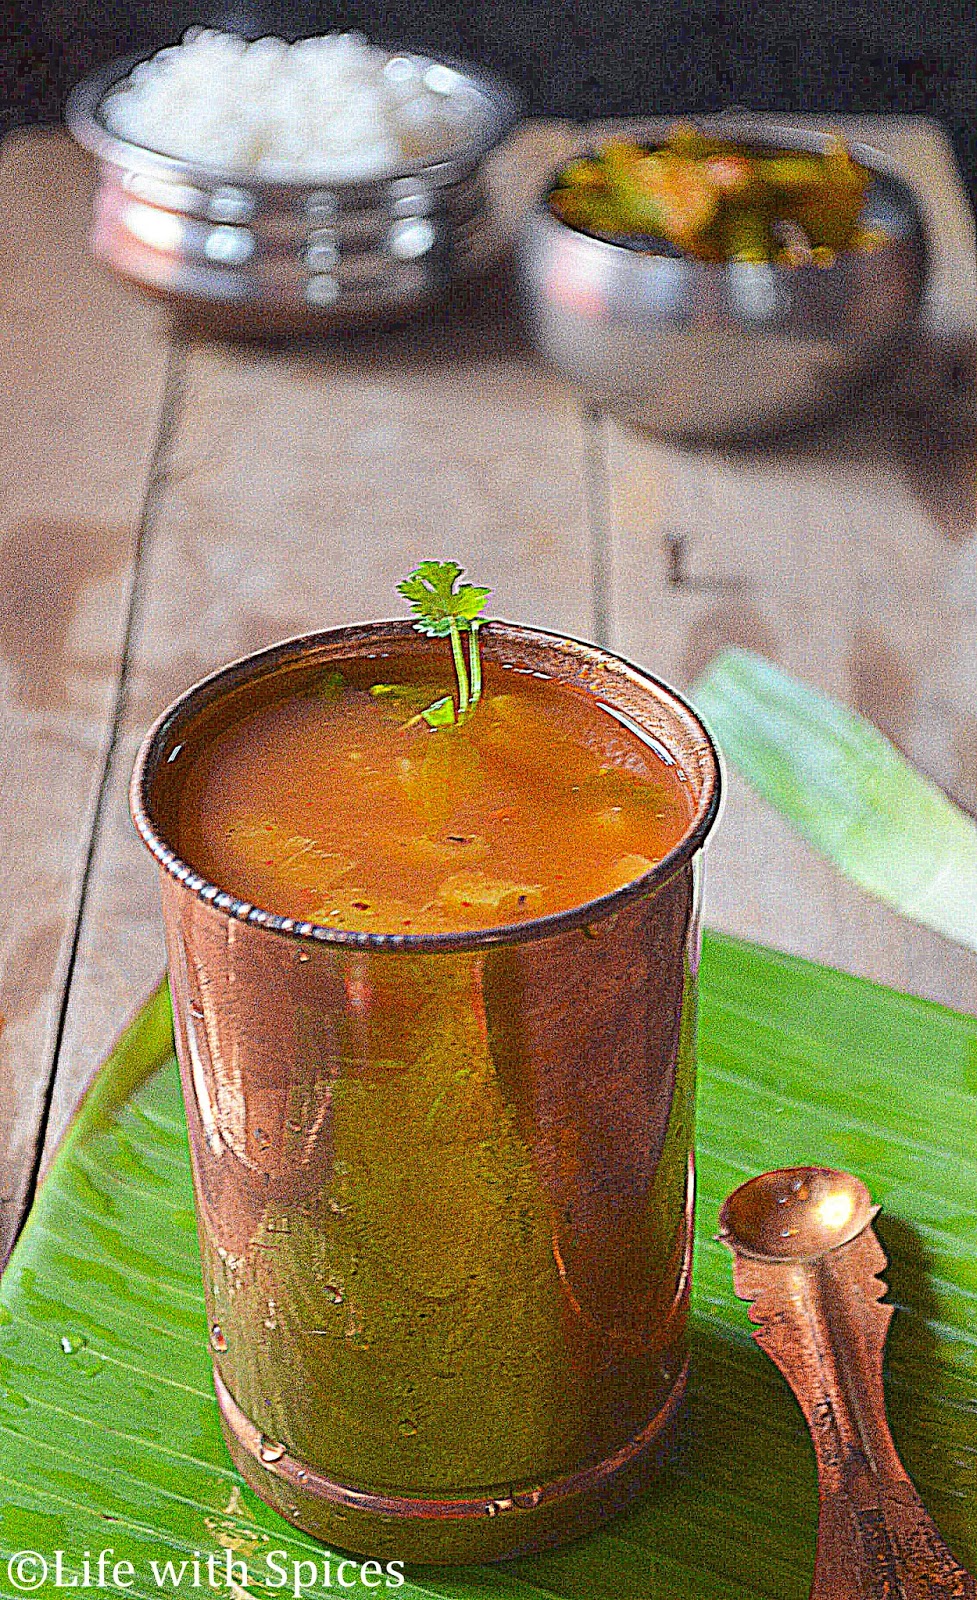 Life with spices: PINEAPPLE RASAM - South Indian Speciality